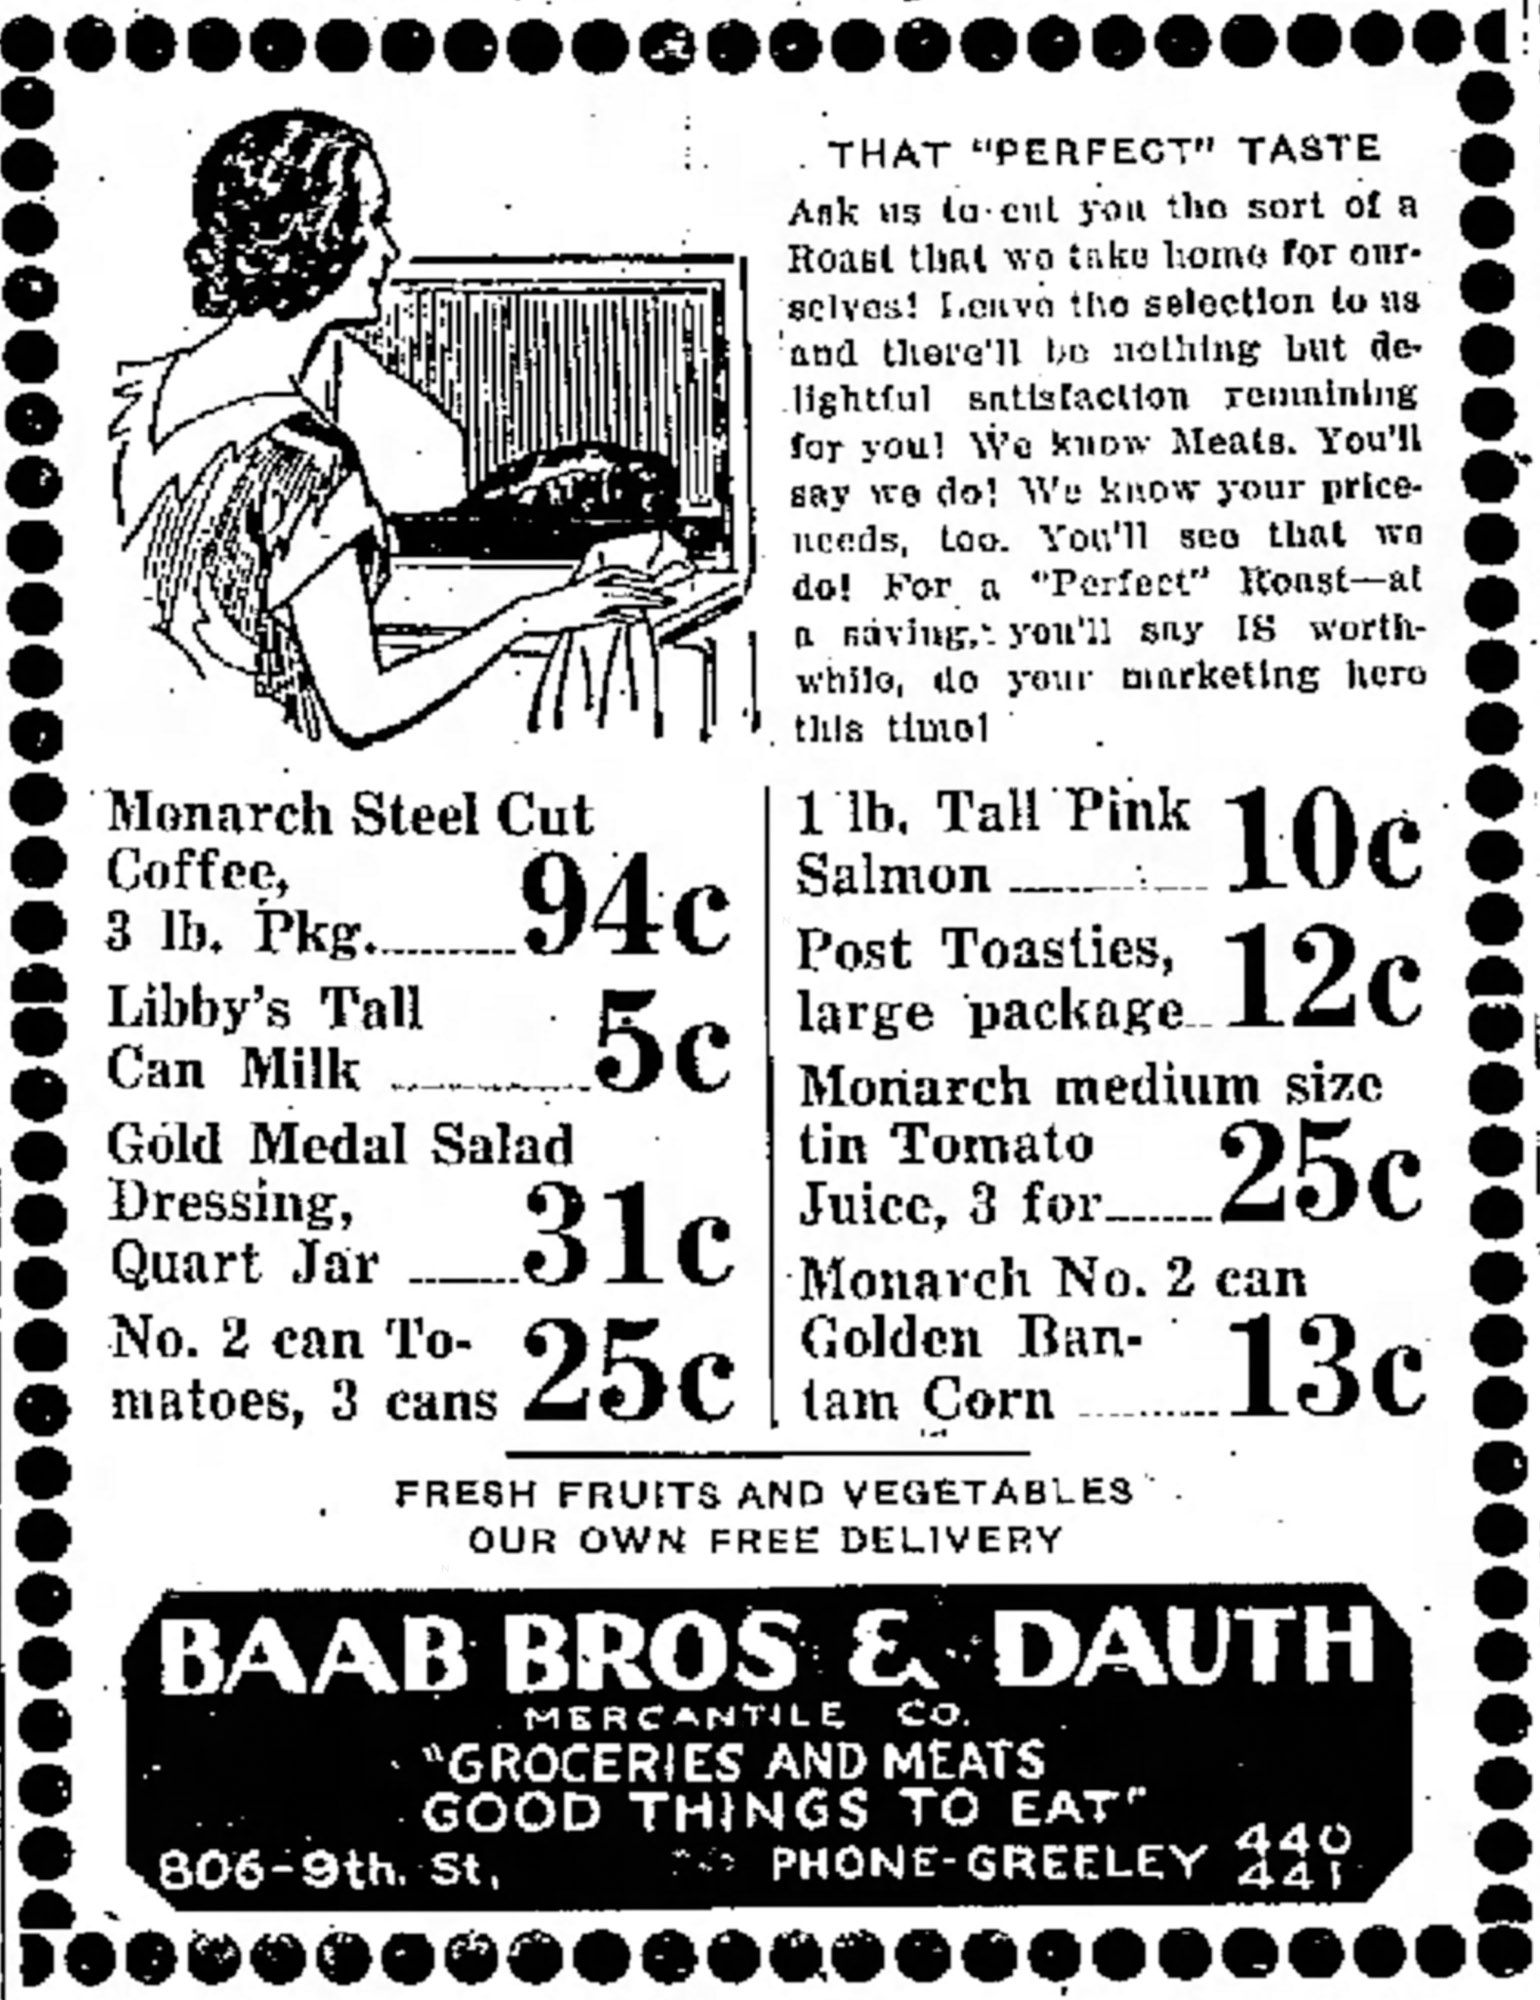 Dauth Family Archive - 1933-01-06 - Greeley Daily Tribune - Baab Bros and Dauth Advertisement